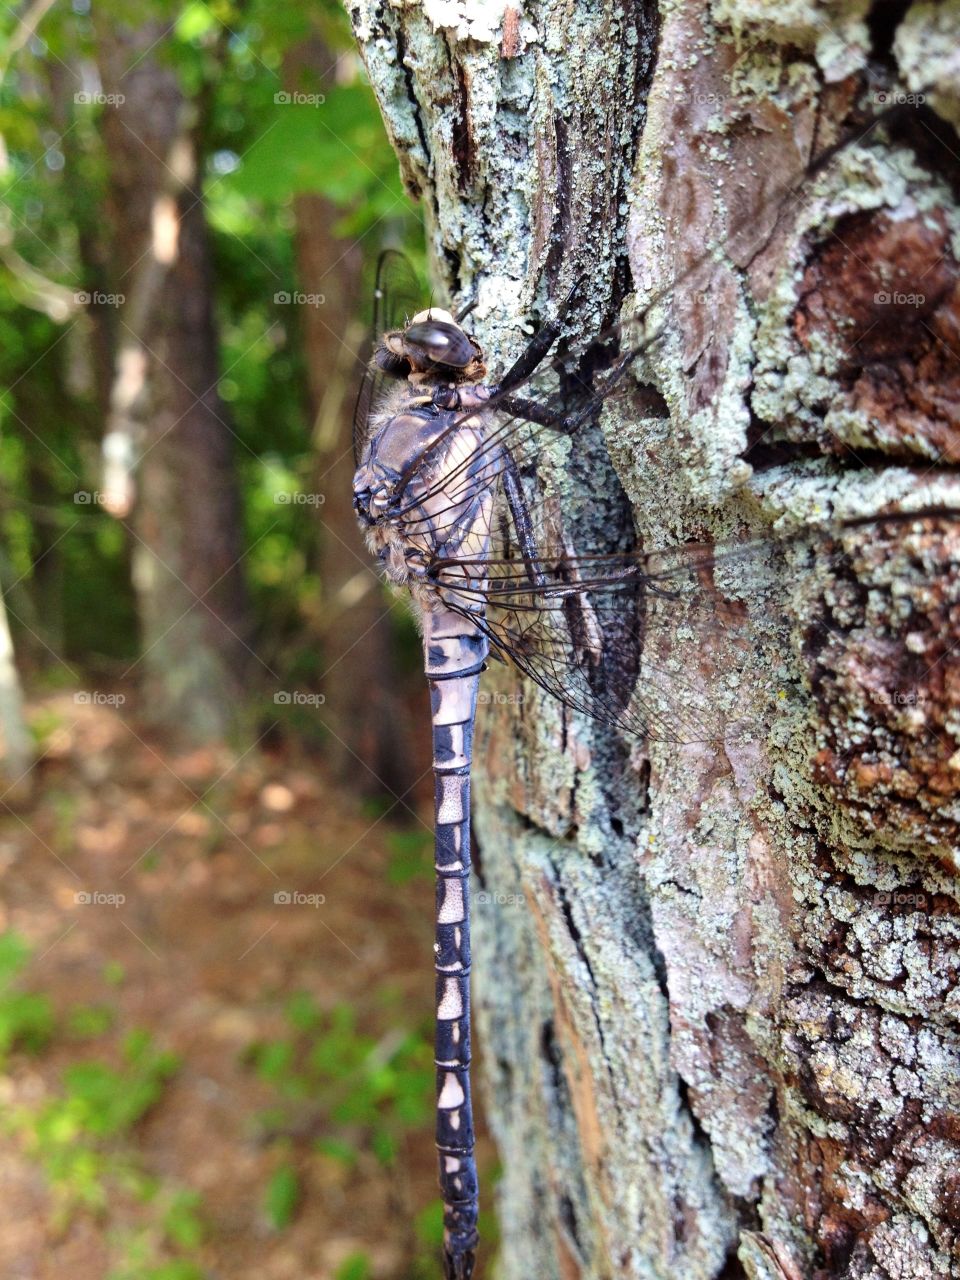 Dragonfly on tree in forest camouflaged against tree.